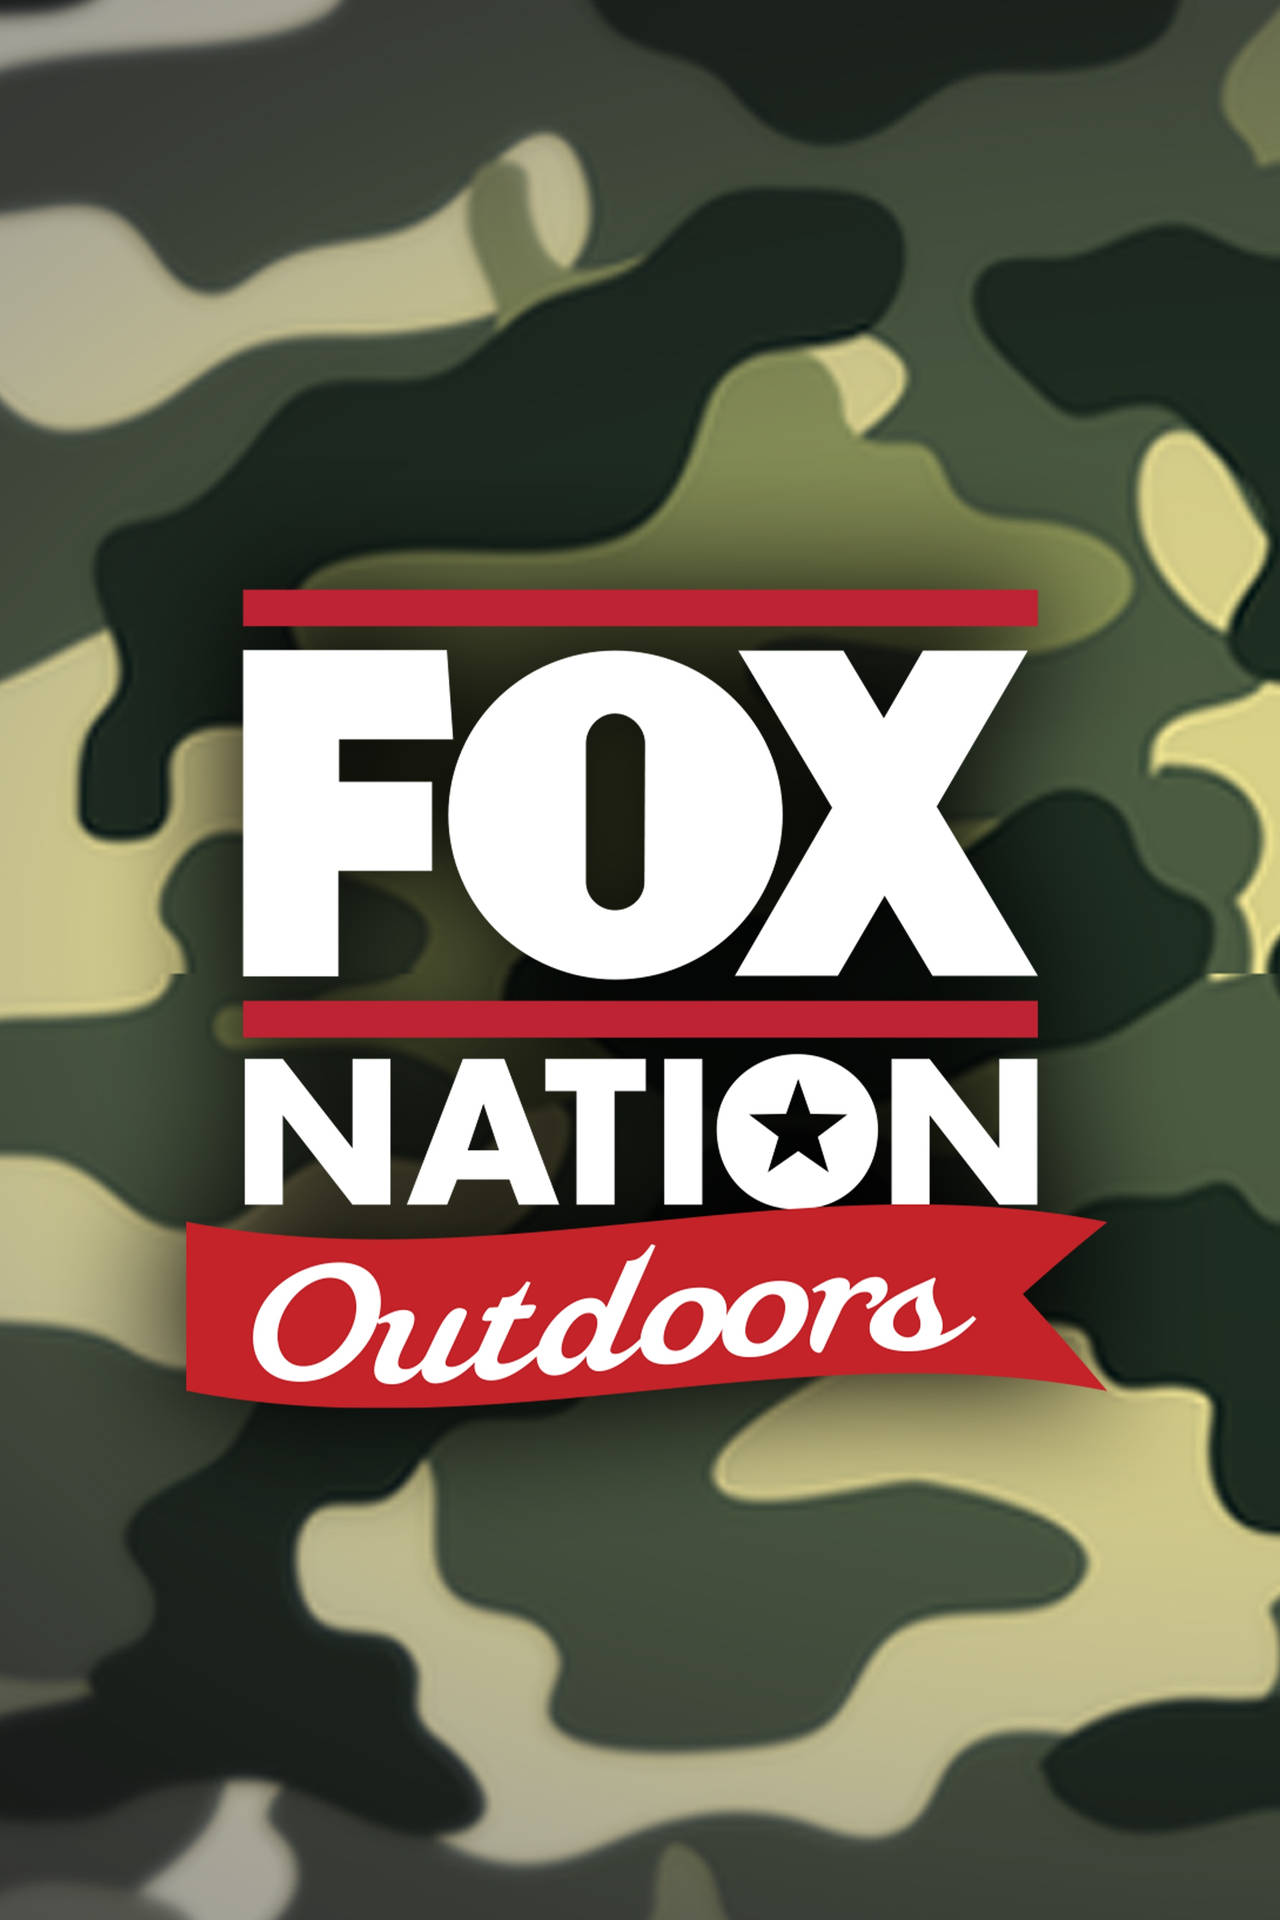 Fox News Nation Outdoors Background